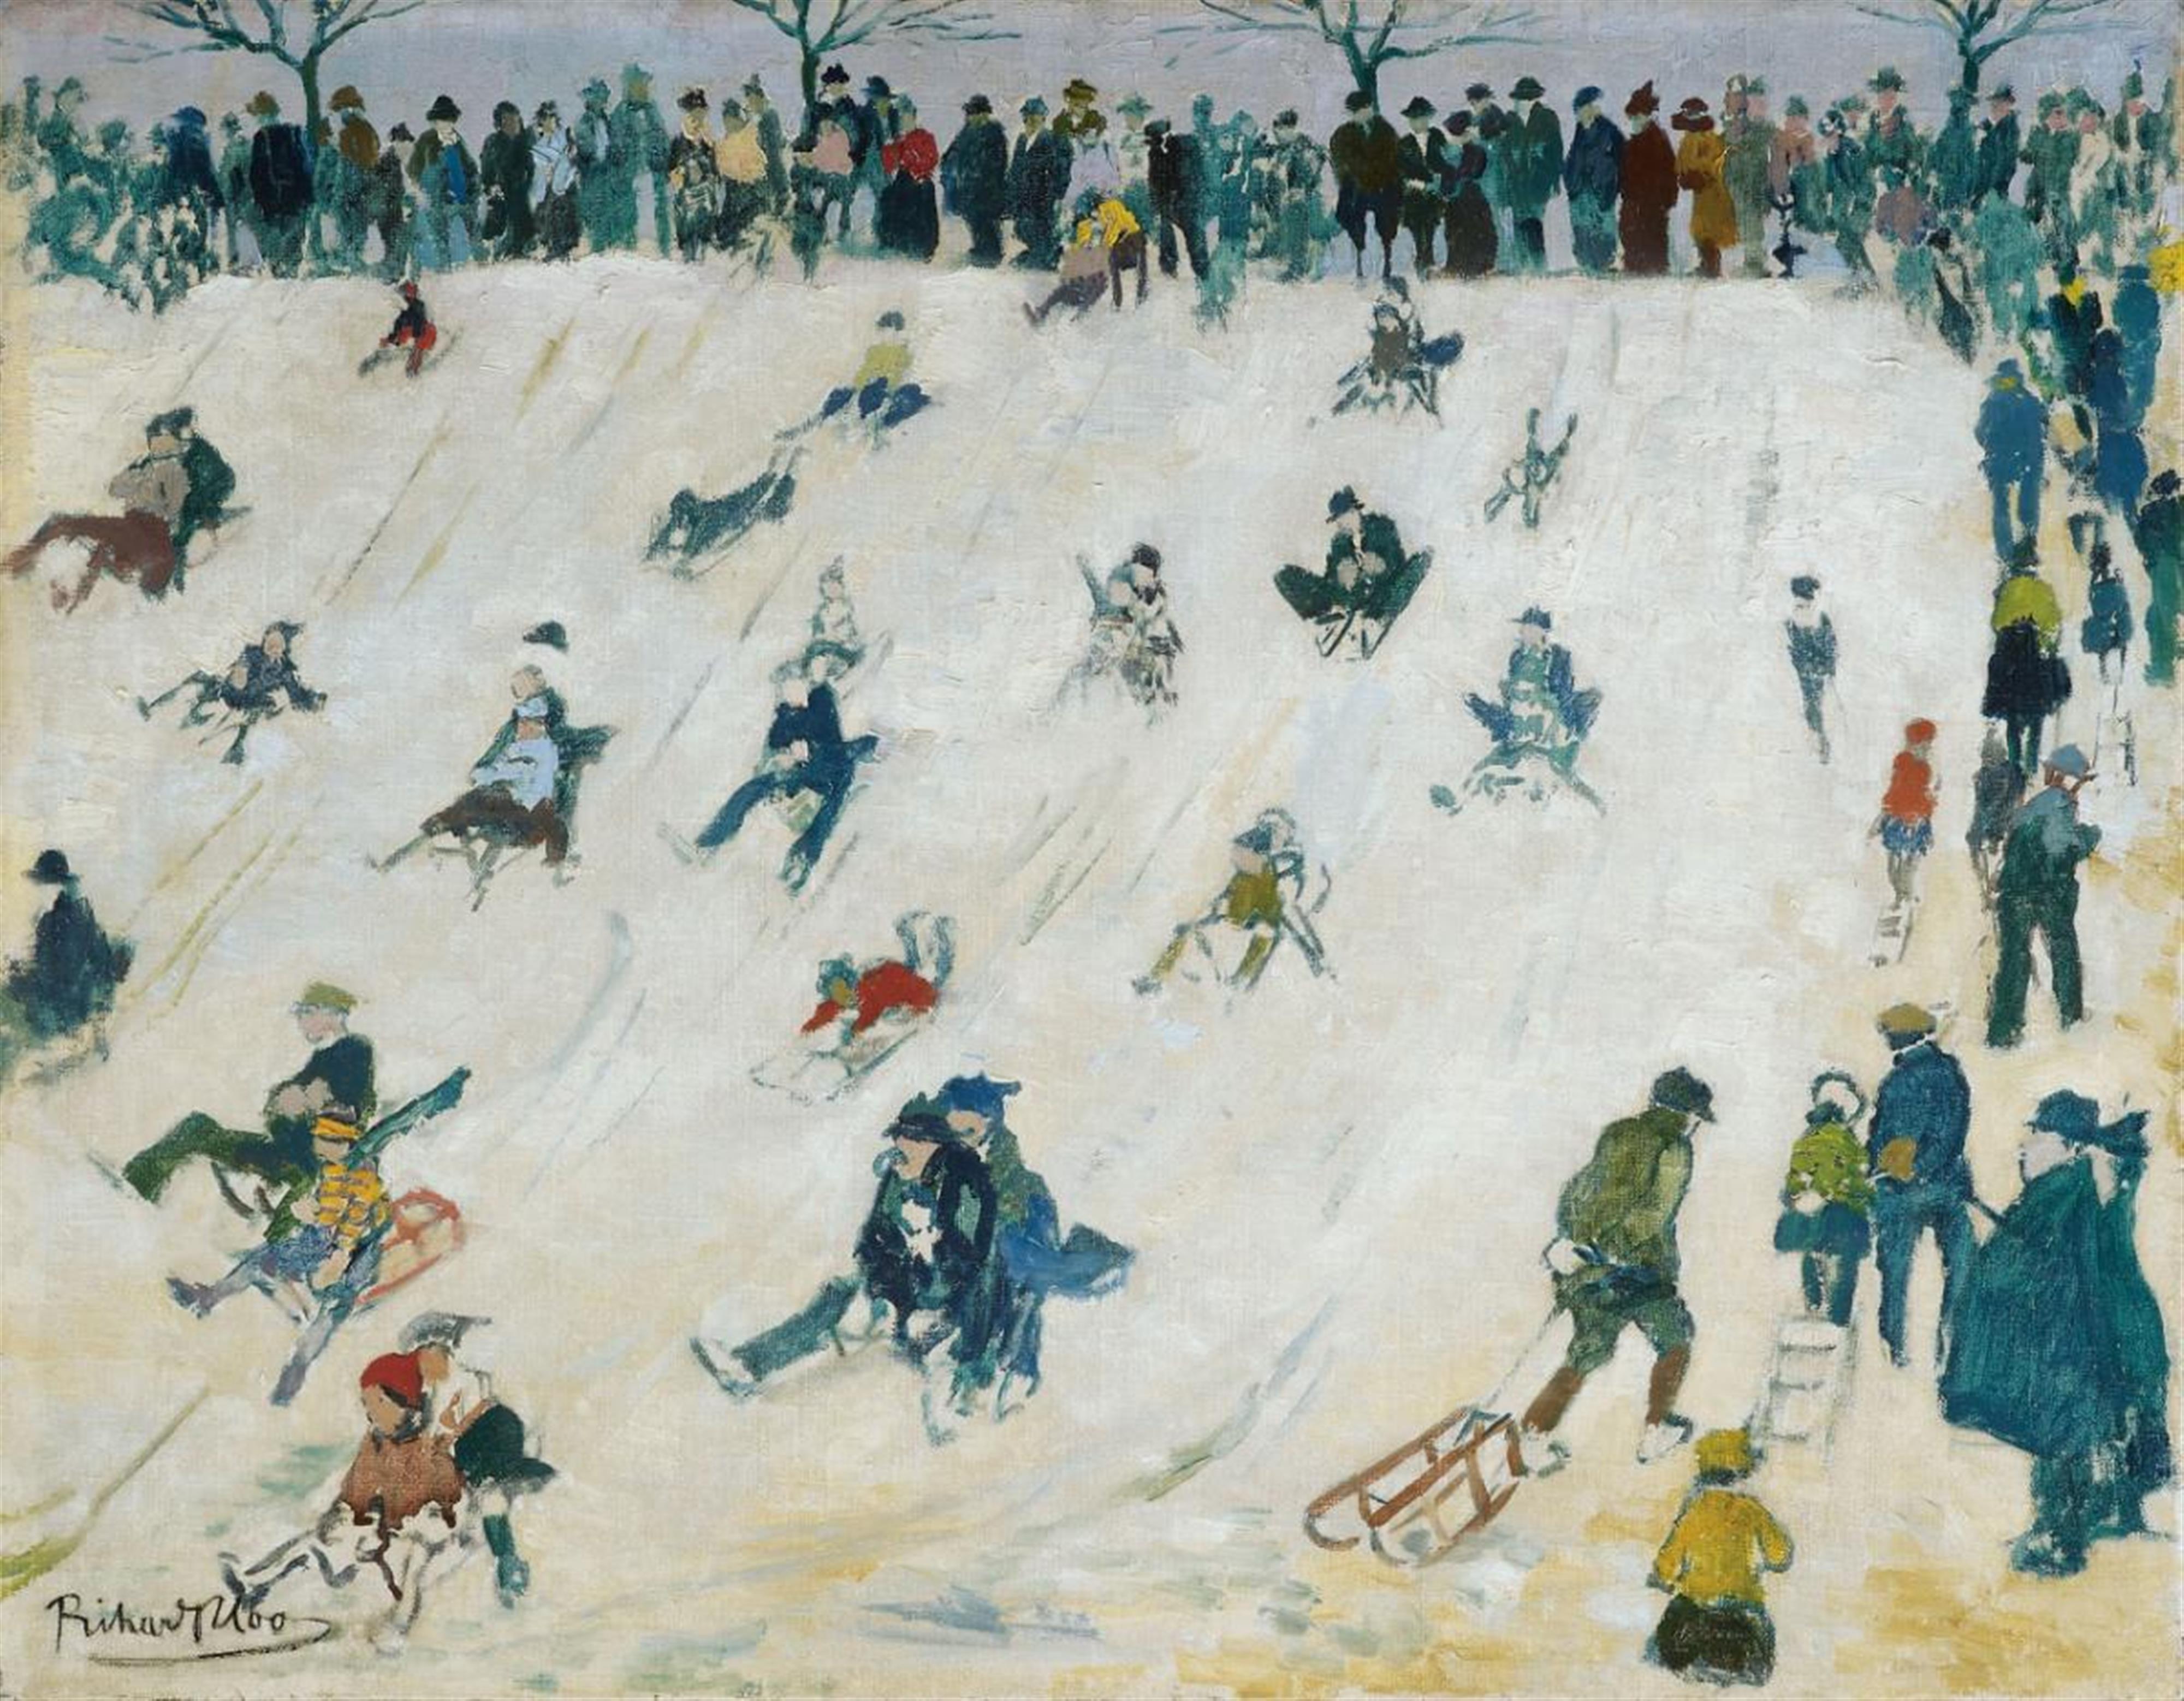 Richard Bloos - Scope with Sledders - image-1